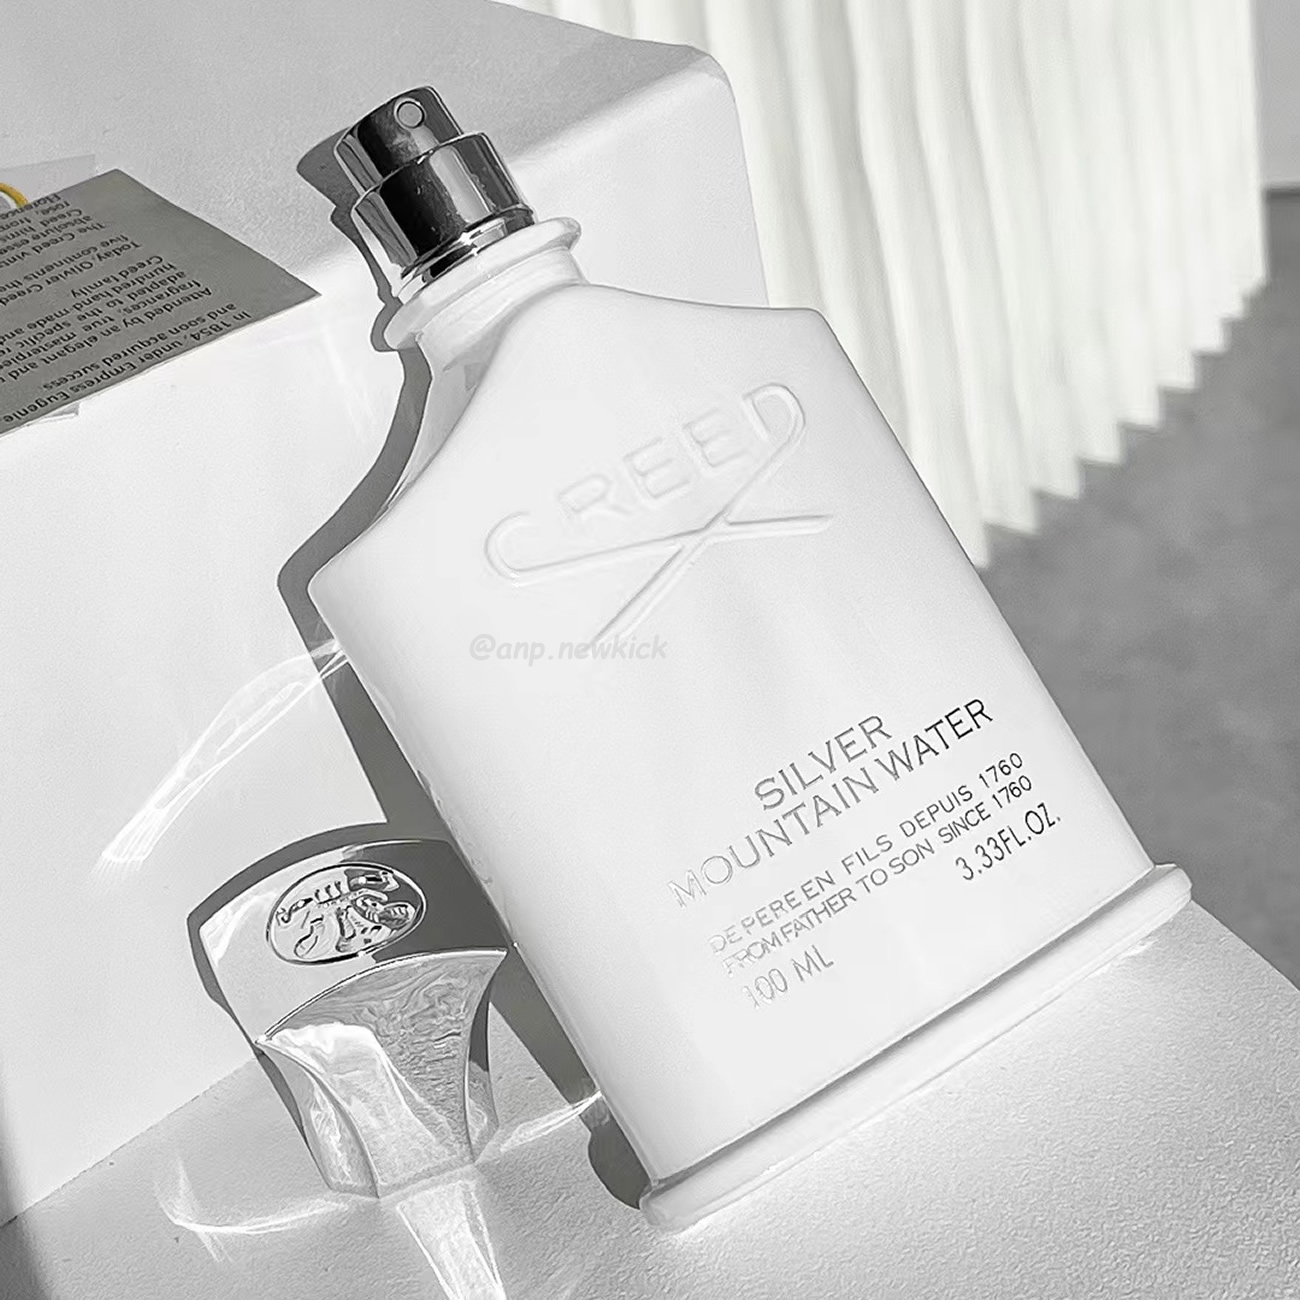 Creed Silver Mountain Water Spray For Unisex 100ml (7) - newkick.org